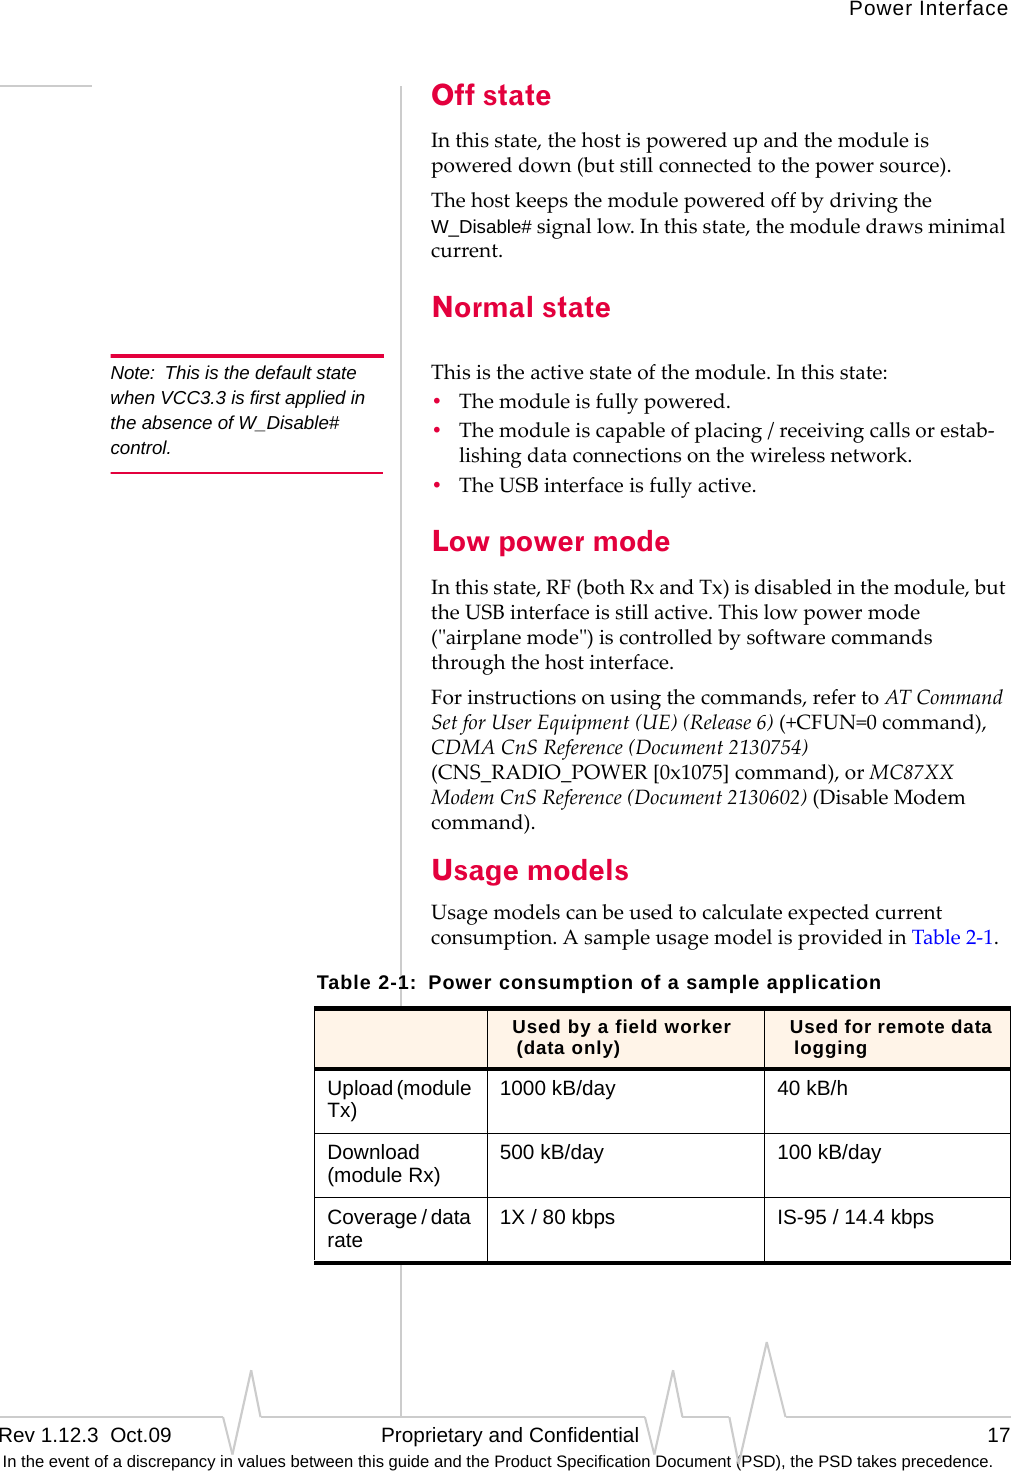 Power InterfaceRev 1.12.3  Oct.09   Proprietary and Confidential 17 In the event of a discrepancy in values between this guide and the Product Specification Document (PSD), the PSD takes precedence.Off stateInthisstate,thehostispoweredupandthemoduleispowereddown(butstillconnectedtothepowersource).ThehostkeepsthemodulepoweredoffbydrivingtheW_Disable#signallow.Inthisstate,themoduledrawsminimalcurrent.Normal stateNote: This is the default state when VCC3.3 is first applied in the absence of W_Disable# control.Thisistheactivestateofthemodule.Inthisstate:•Themoduleisfullypowered.•Themoduleiscapableofplacing/receivingcallsorestab‐lishingdataconnectionsonthewirelessnetwork.•TheUSBinterfaceisfullyactive.Low power modeInthisstate,RF(bothRxandTx)isdisabledinthemodule,buttheUSBinterfaceisstillactive.Thislowpowermode(ʺairplanemodeʺ)iscontrolledbysoftwarecommandsthroughthehostinterface.Forinstructionsonusingthecommands,refertoATCommandSetforUserEquipment(UE)(Release6)(+CFUN=0command),CDMACnSReference(Document2130754)(CNS_RADIO_POWER[0x1075]command),orMC87XXModemCnSReference(Document2130602)(DisableModemcommand).Usage modelsUsagemodelscanbeusedtocalculateexpectedcurrentconsumption.AsampleusagemodelisprovidedinTable2‐1.Table 2-1:  Power consumption of a sample application Used by a field worker (data only) Used for remote data loggingUpload (module Tx) 1000 kB/day 40 kB/hDownload (module Rx) 500 kB/day 100 kB/dayCoverage / data rate 1X / 80 kbps IS-95 / 14.4 kbps